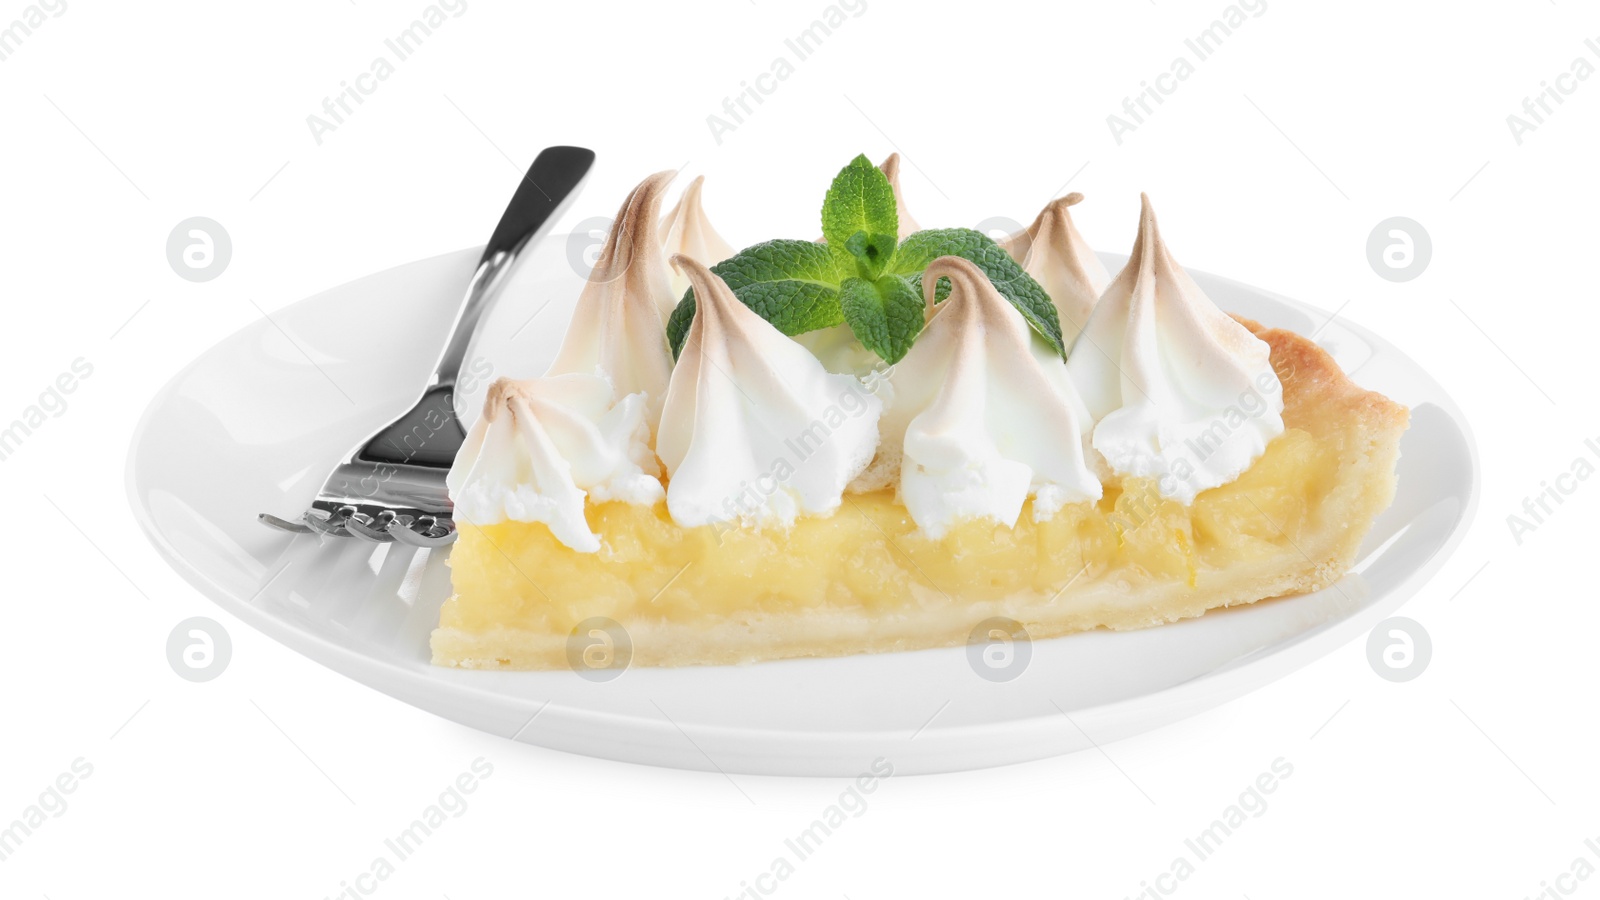 Photo of Piece of delicious lemon meringue pie with plate and fork isolated on white